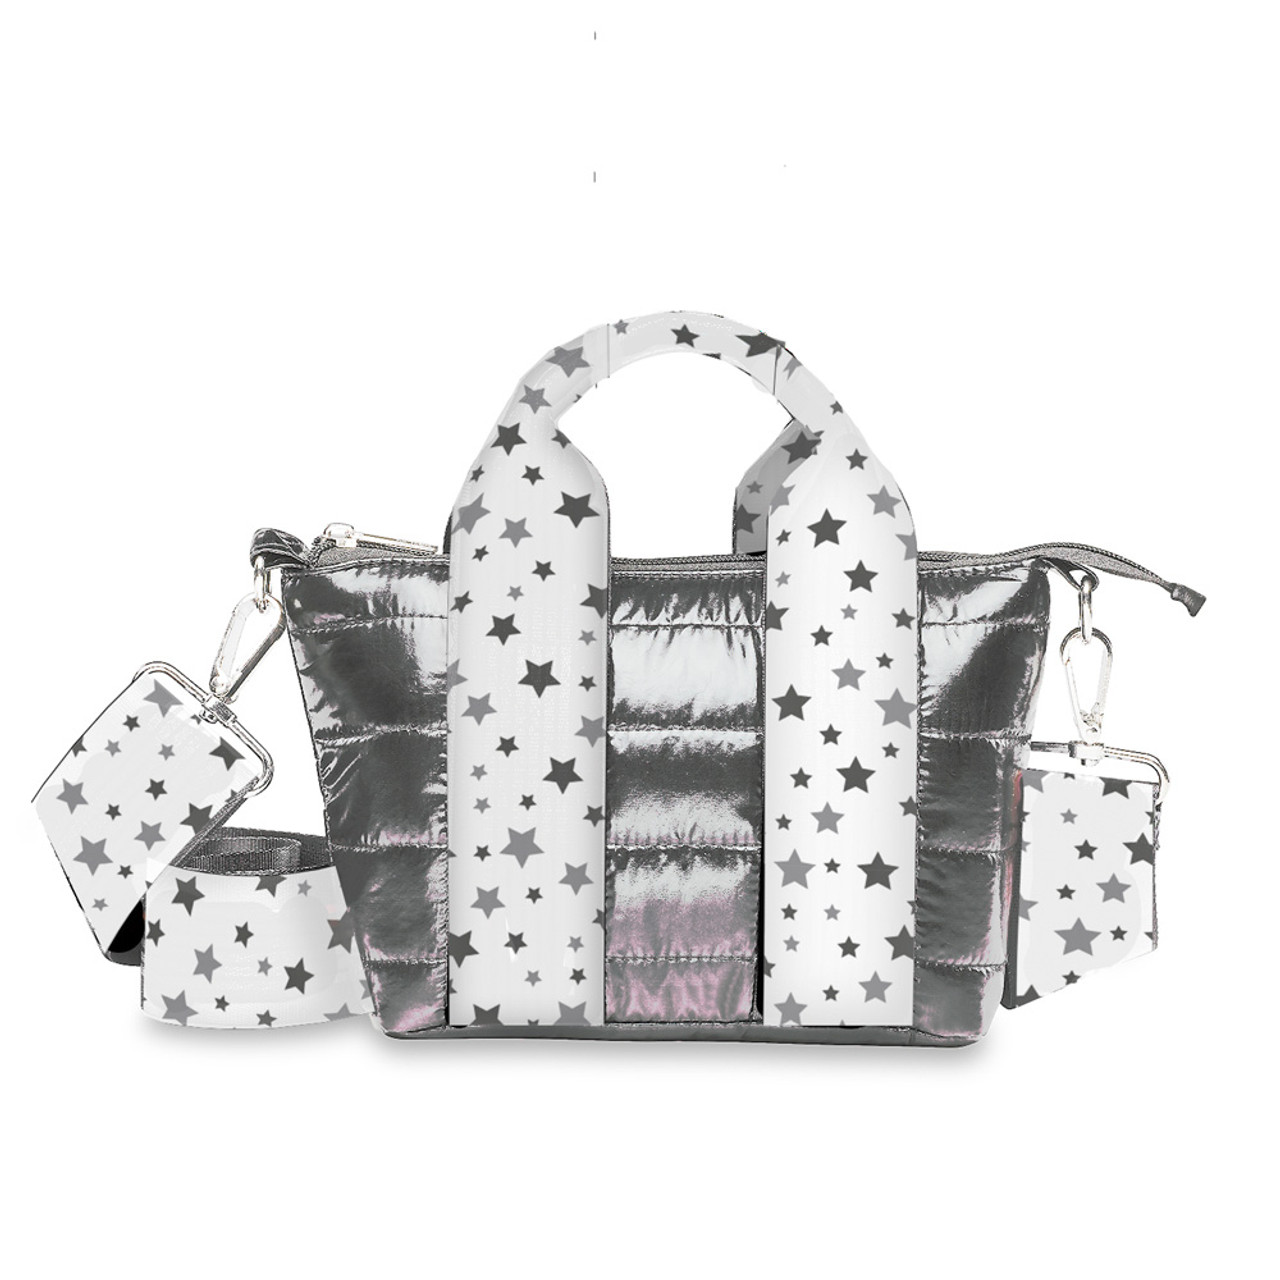 Fun Black Puffer Tiny Tote With Star Straps For Kids